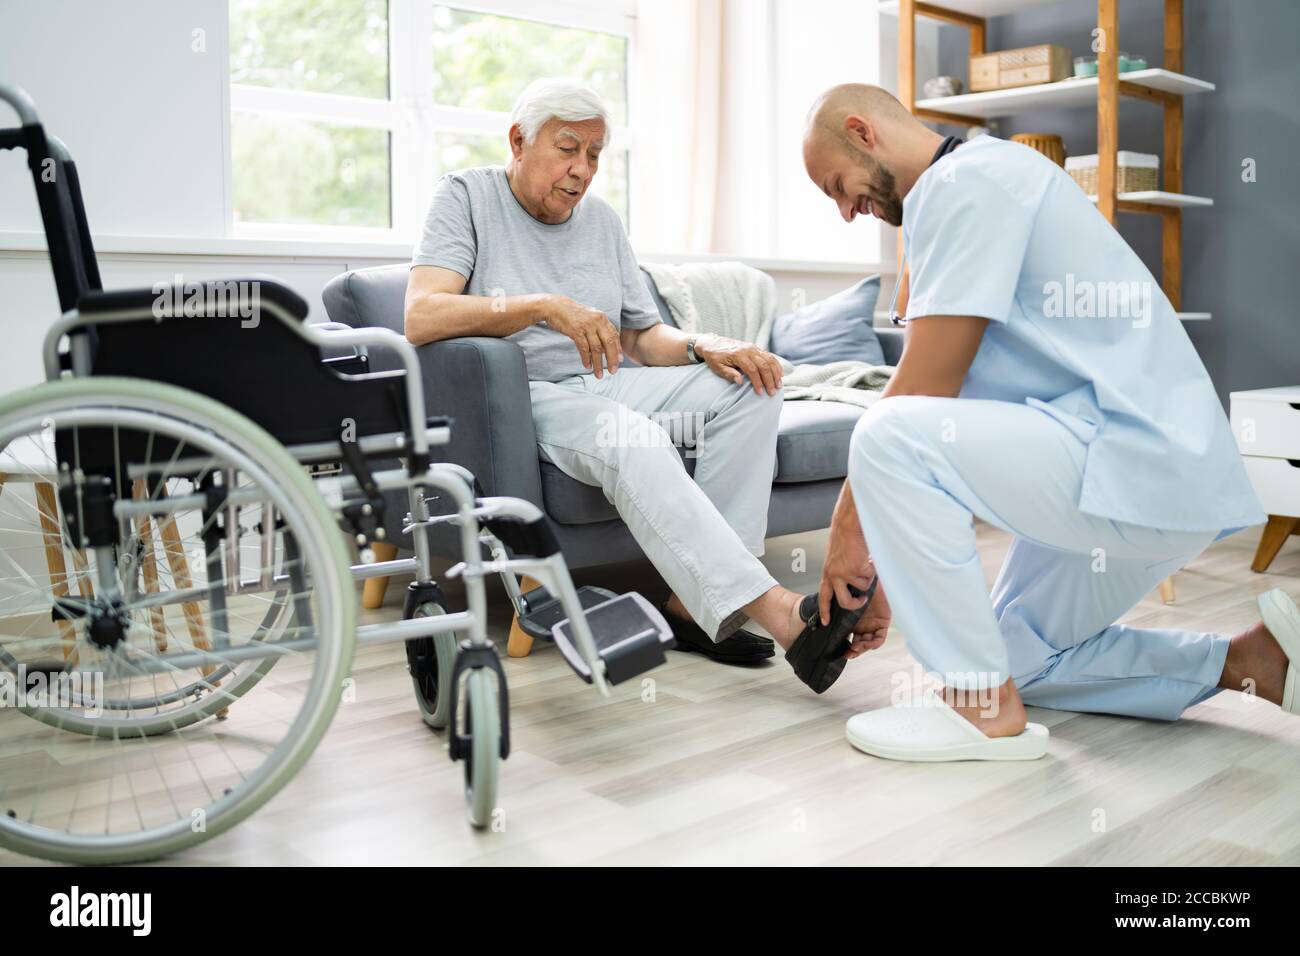 Old Senior Home Care. Nurse Helping Patient To Dress Shoes Stock Photo